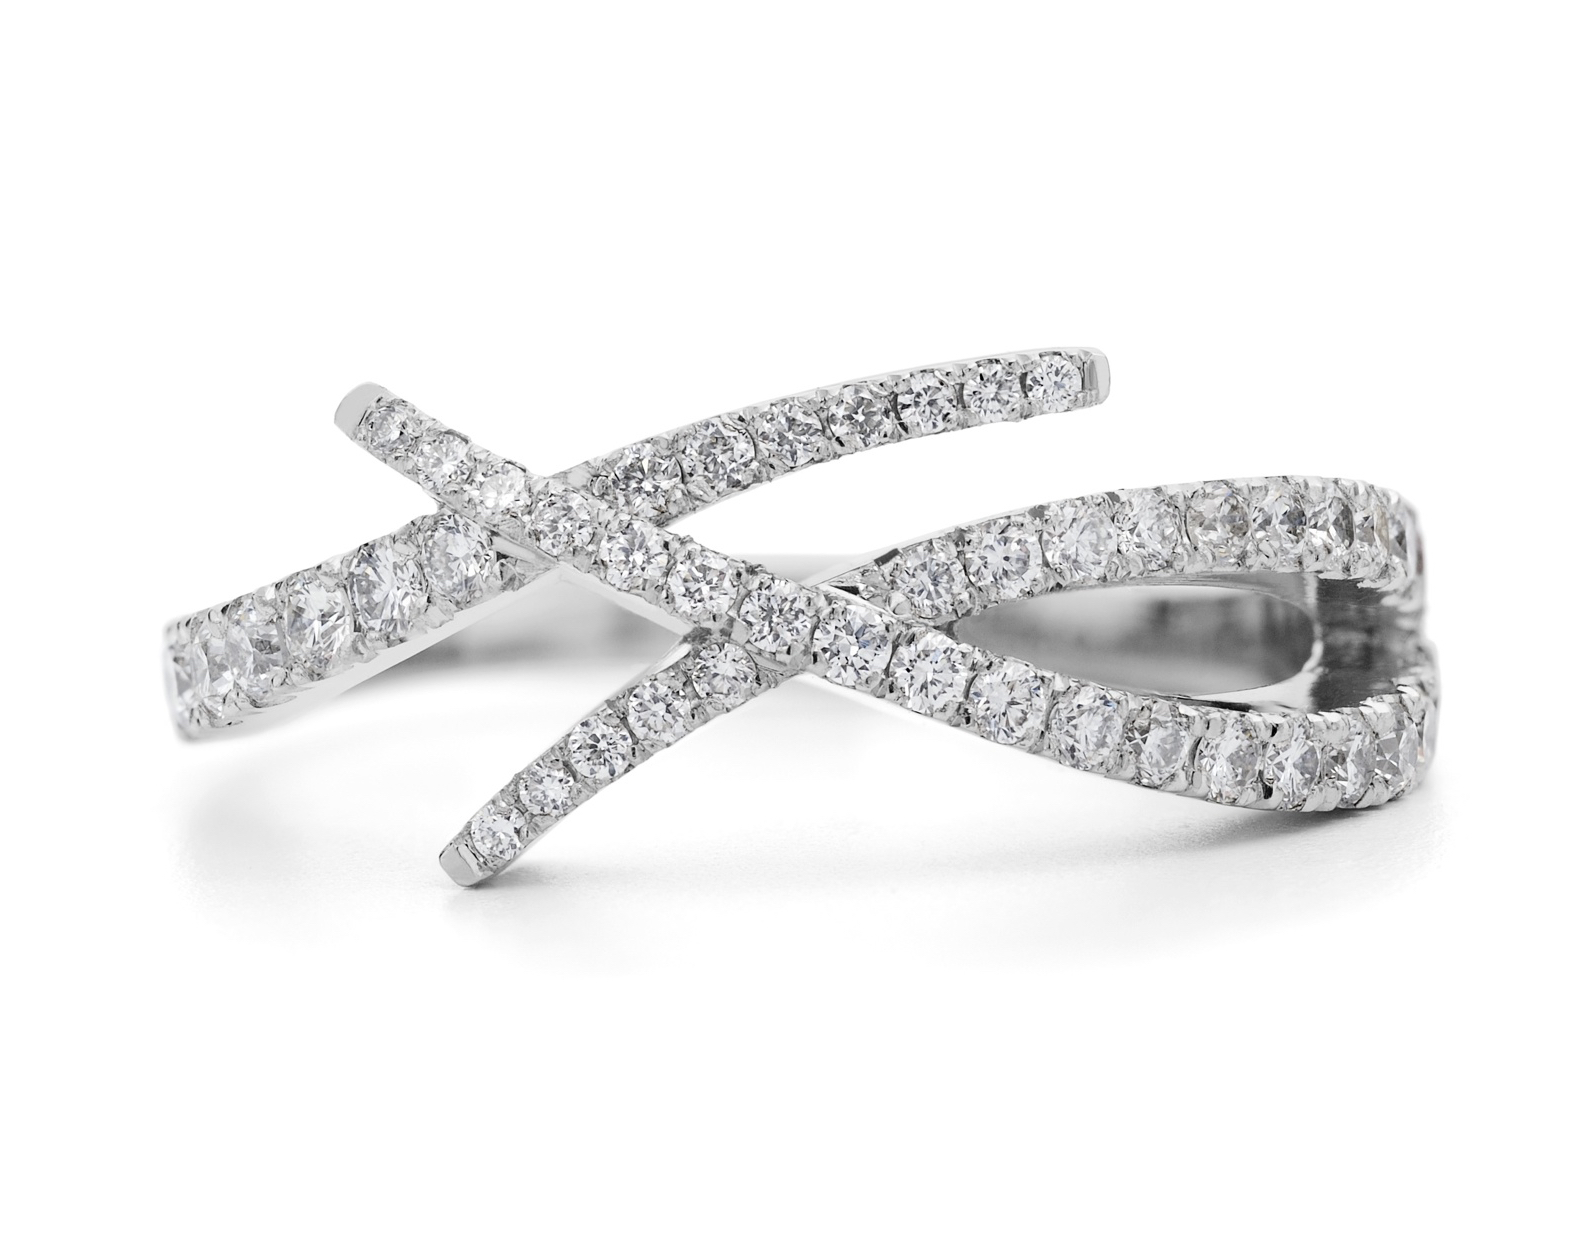 All in one diamond and platinum engagement and wedding ring